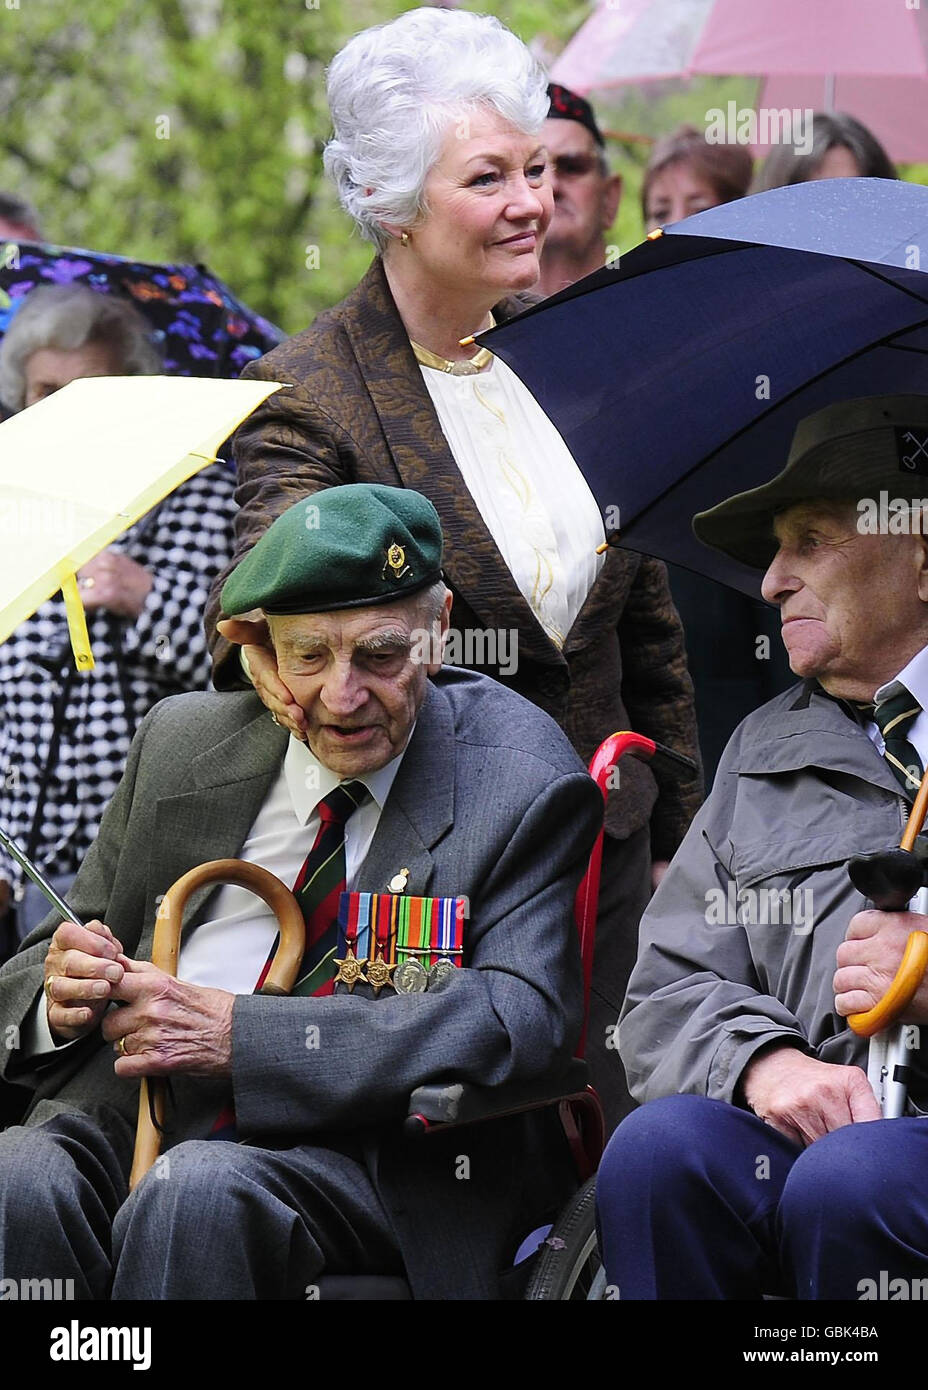 Veterans of the Battle of Kohima remembered at the 65th anniversary of the battle, with a service at York Minster and wreath laying at the Kohima Memorial in the Minster Gardens. Stock Photo